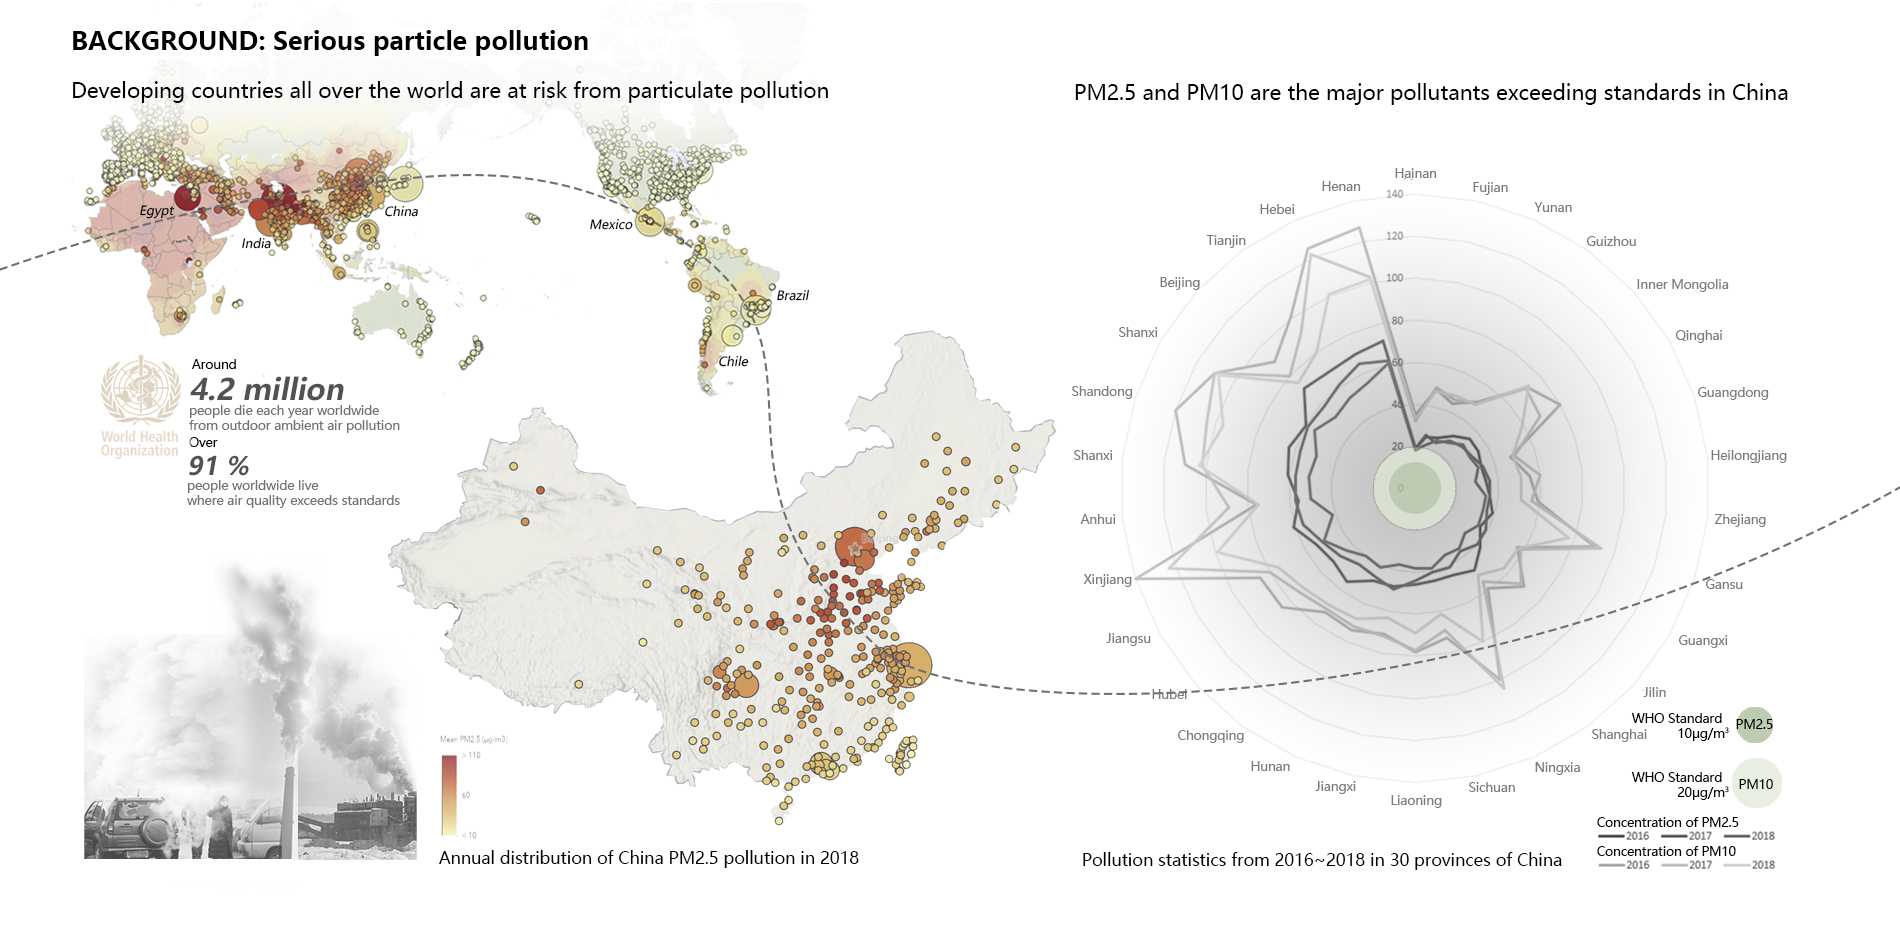 Background: Serious particle pollution